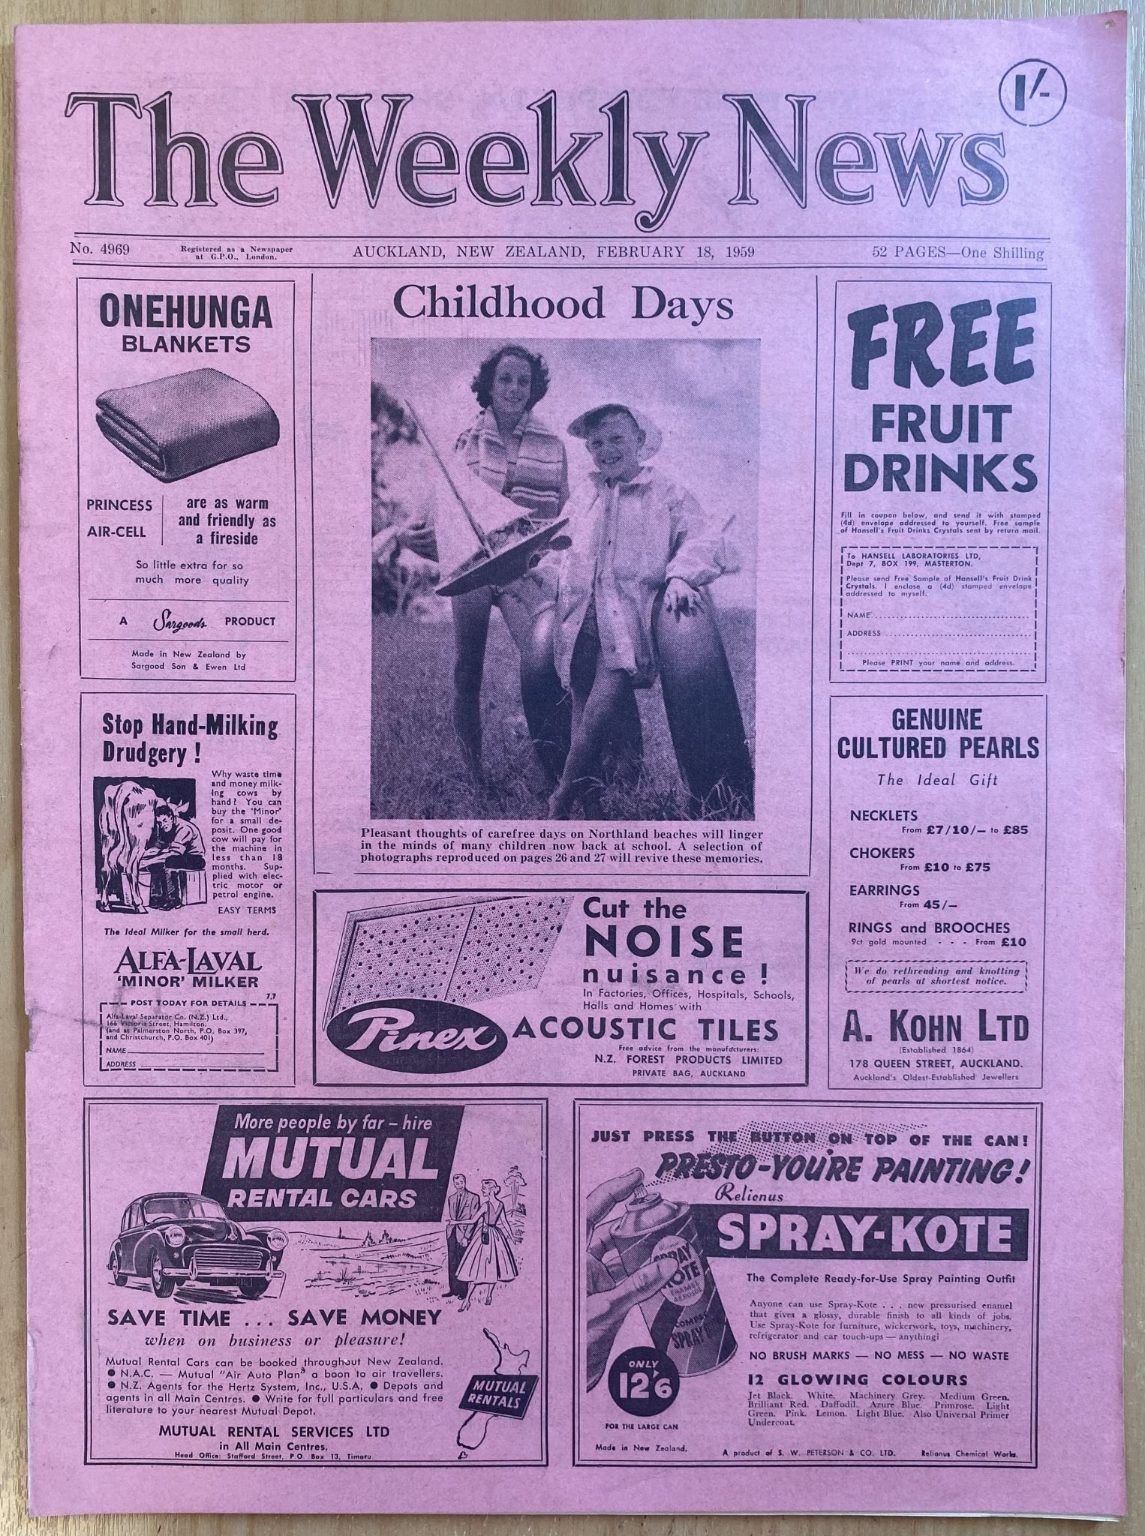 OLD NEWSPAPER: The Weekly News - No. 4969, 18 February 1959